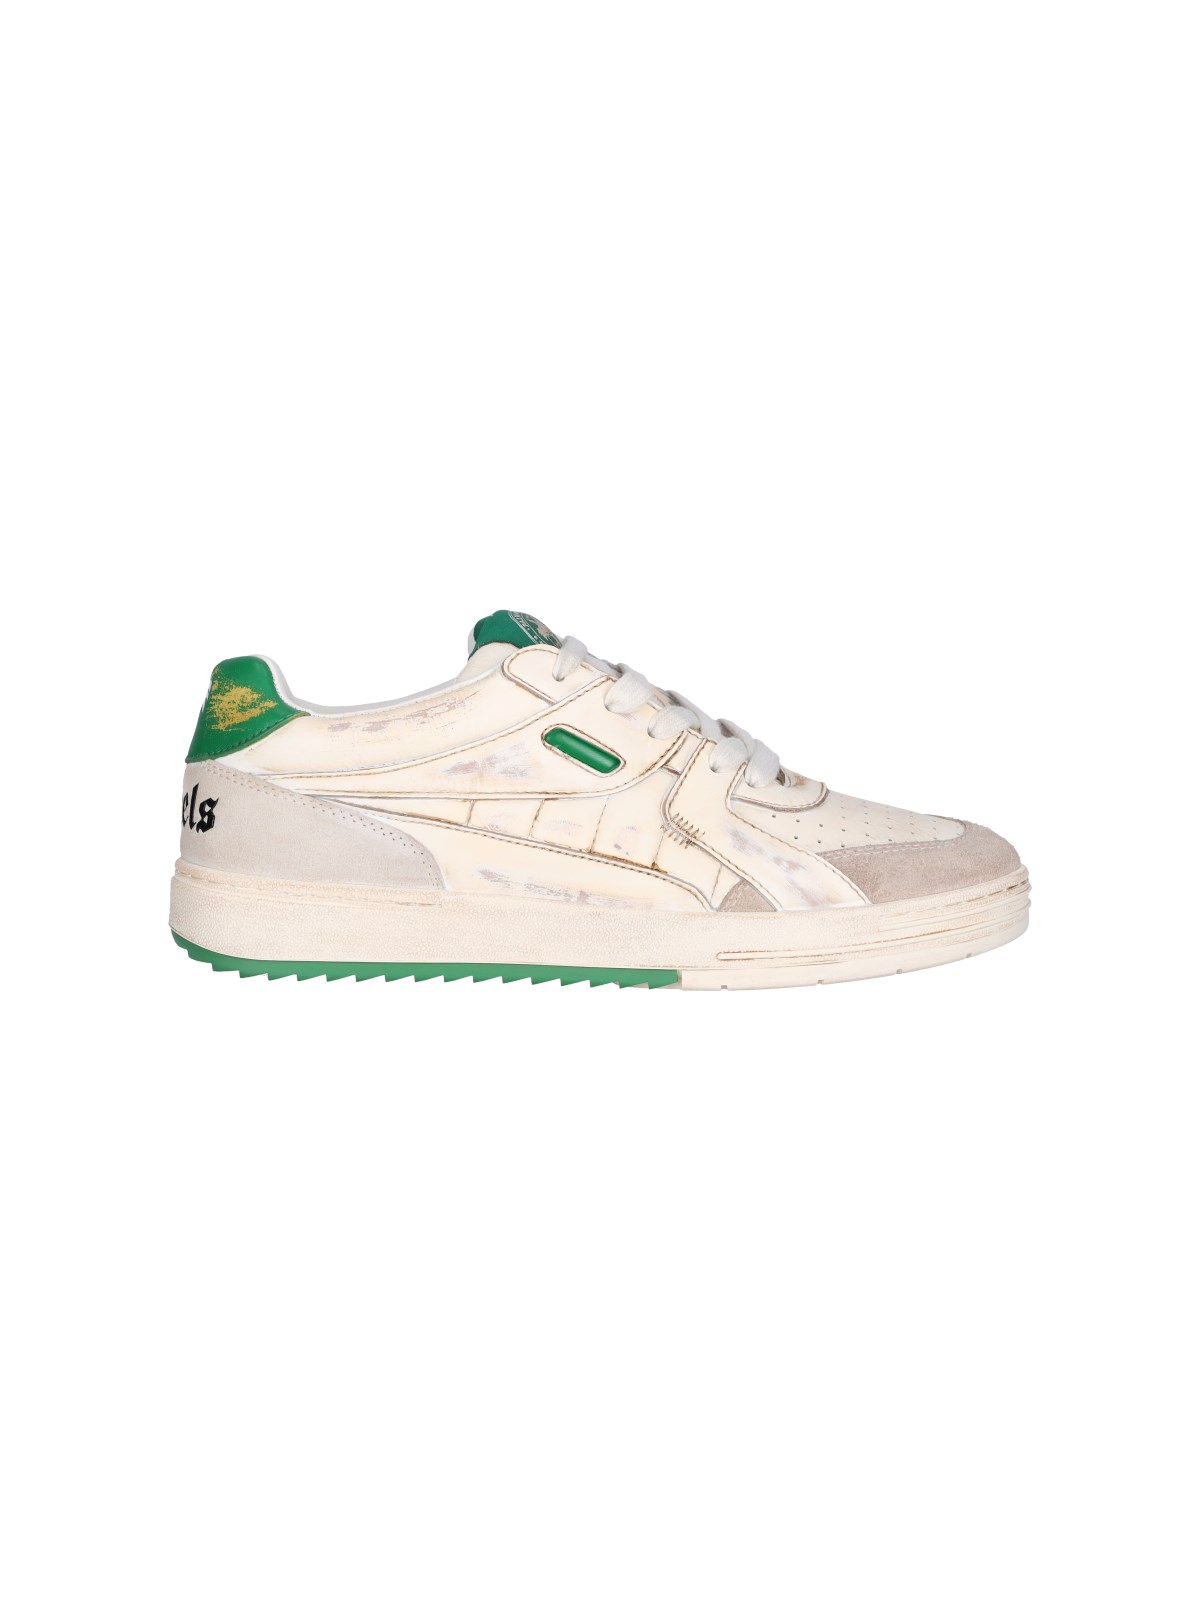 PALM ANGELS "UNIVERSITY" trainers